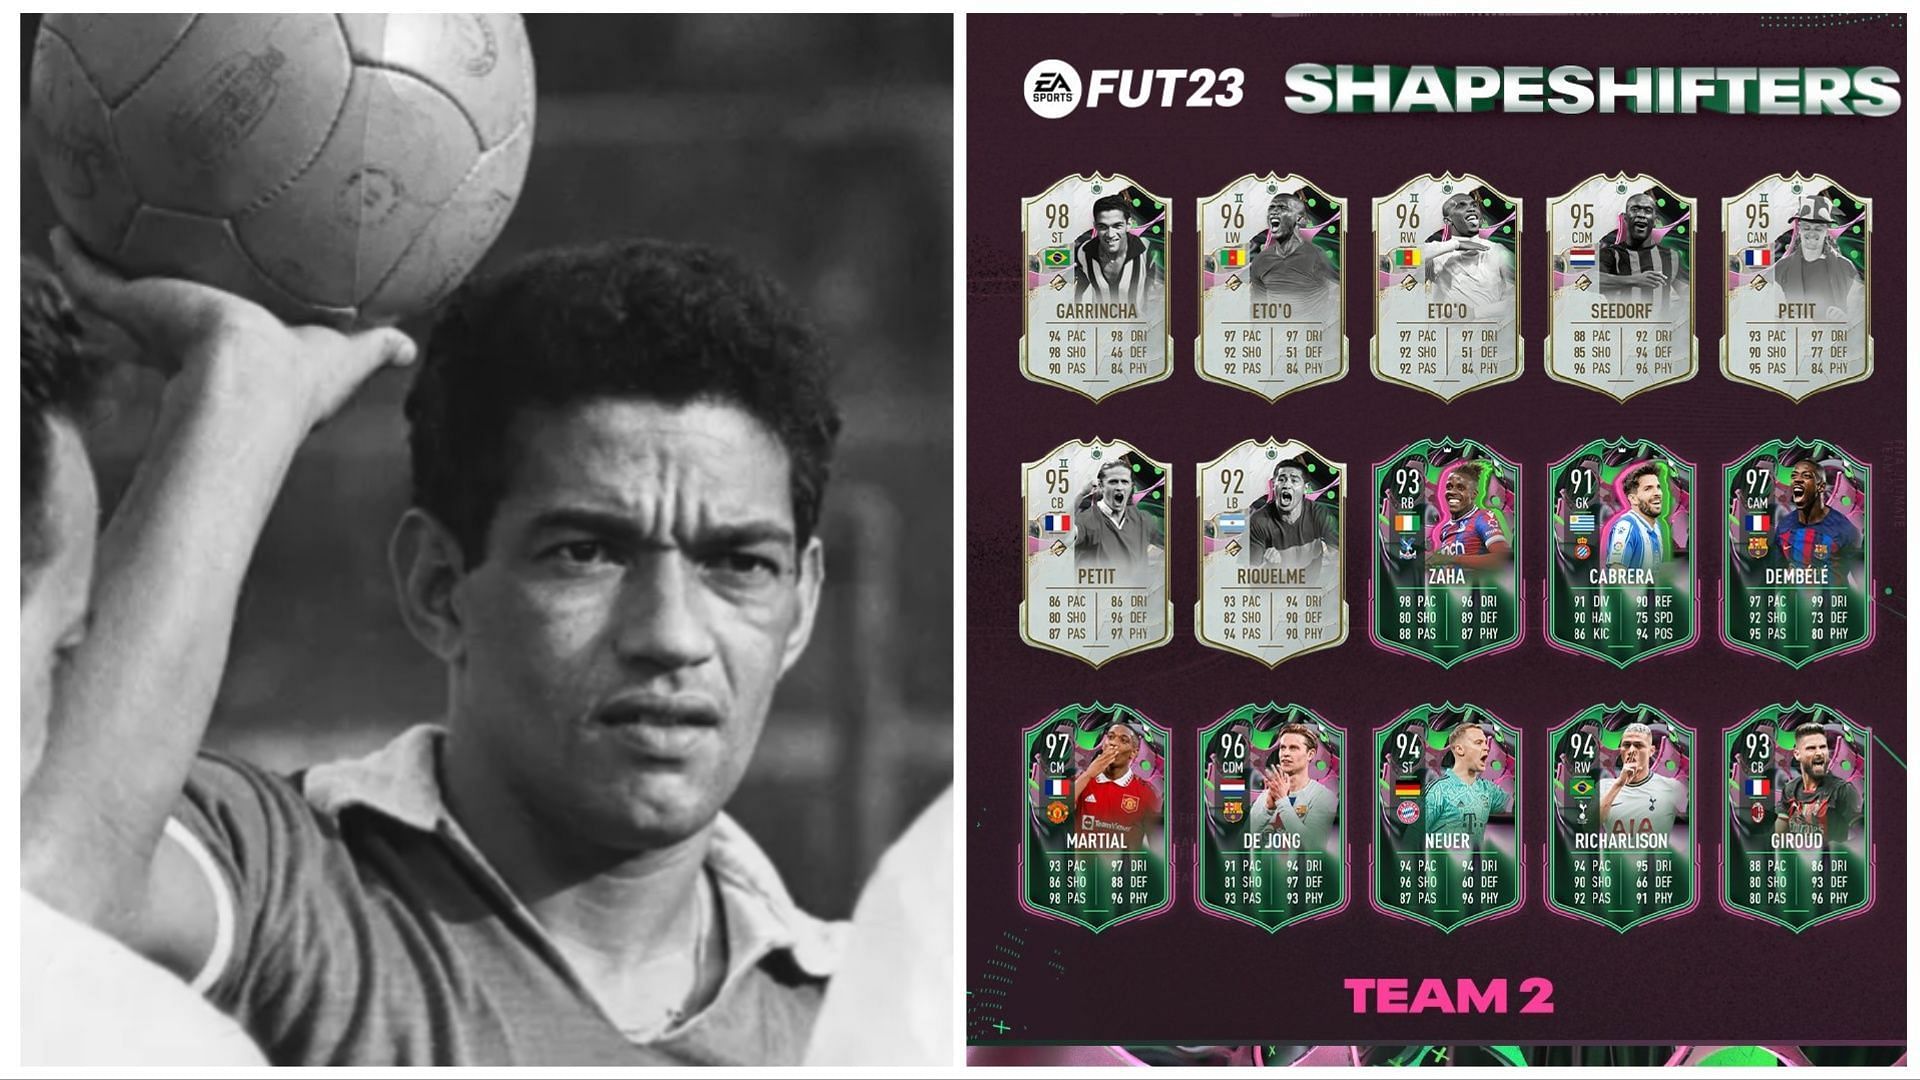 Shapeshifters Team 2 is now available (Images via Getty and EA Sports)